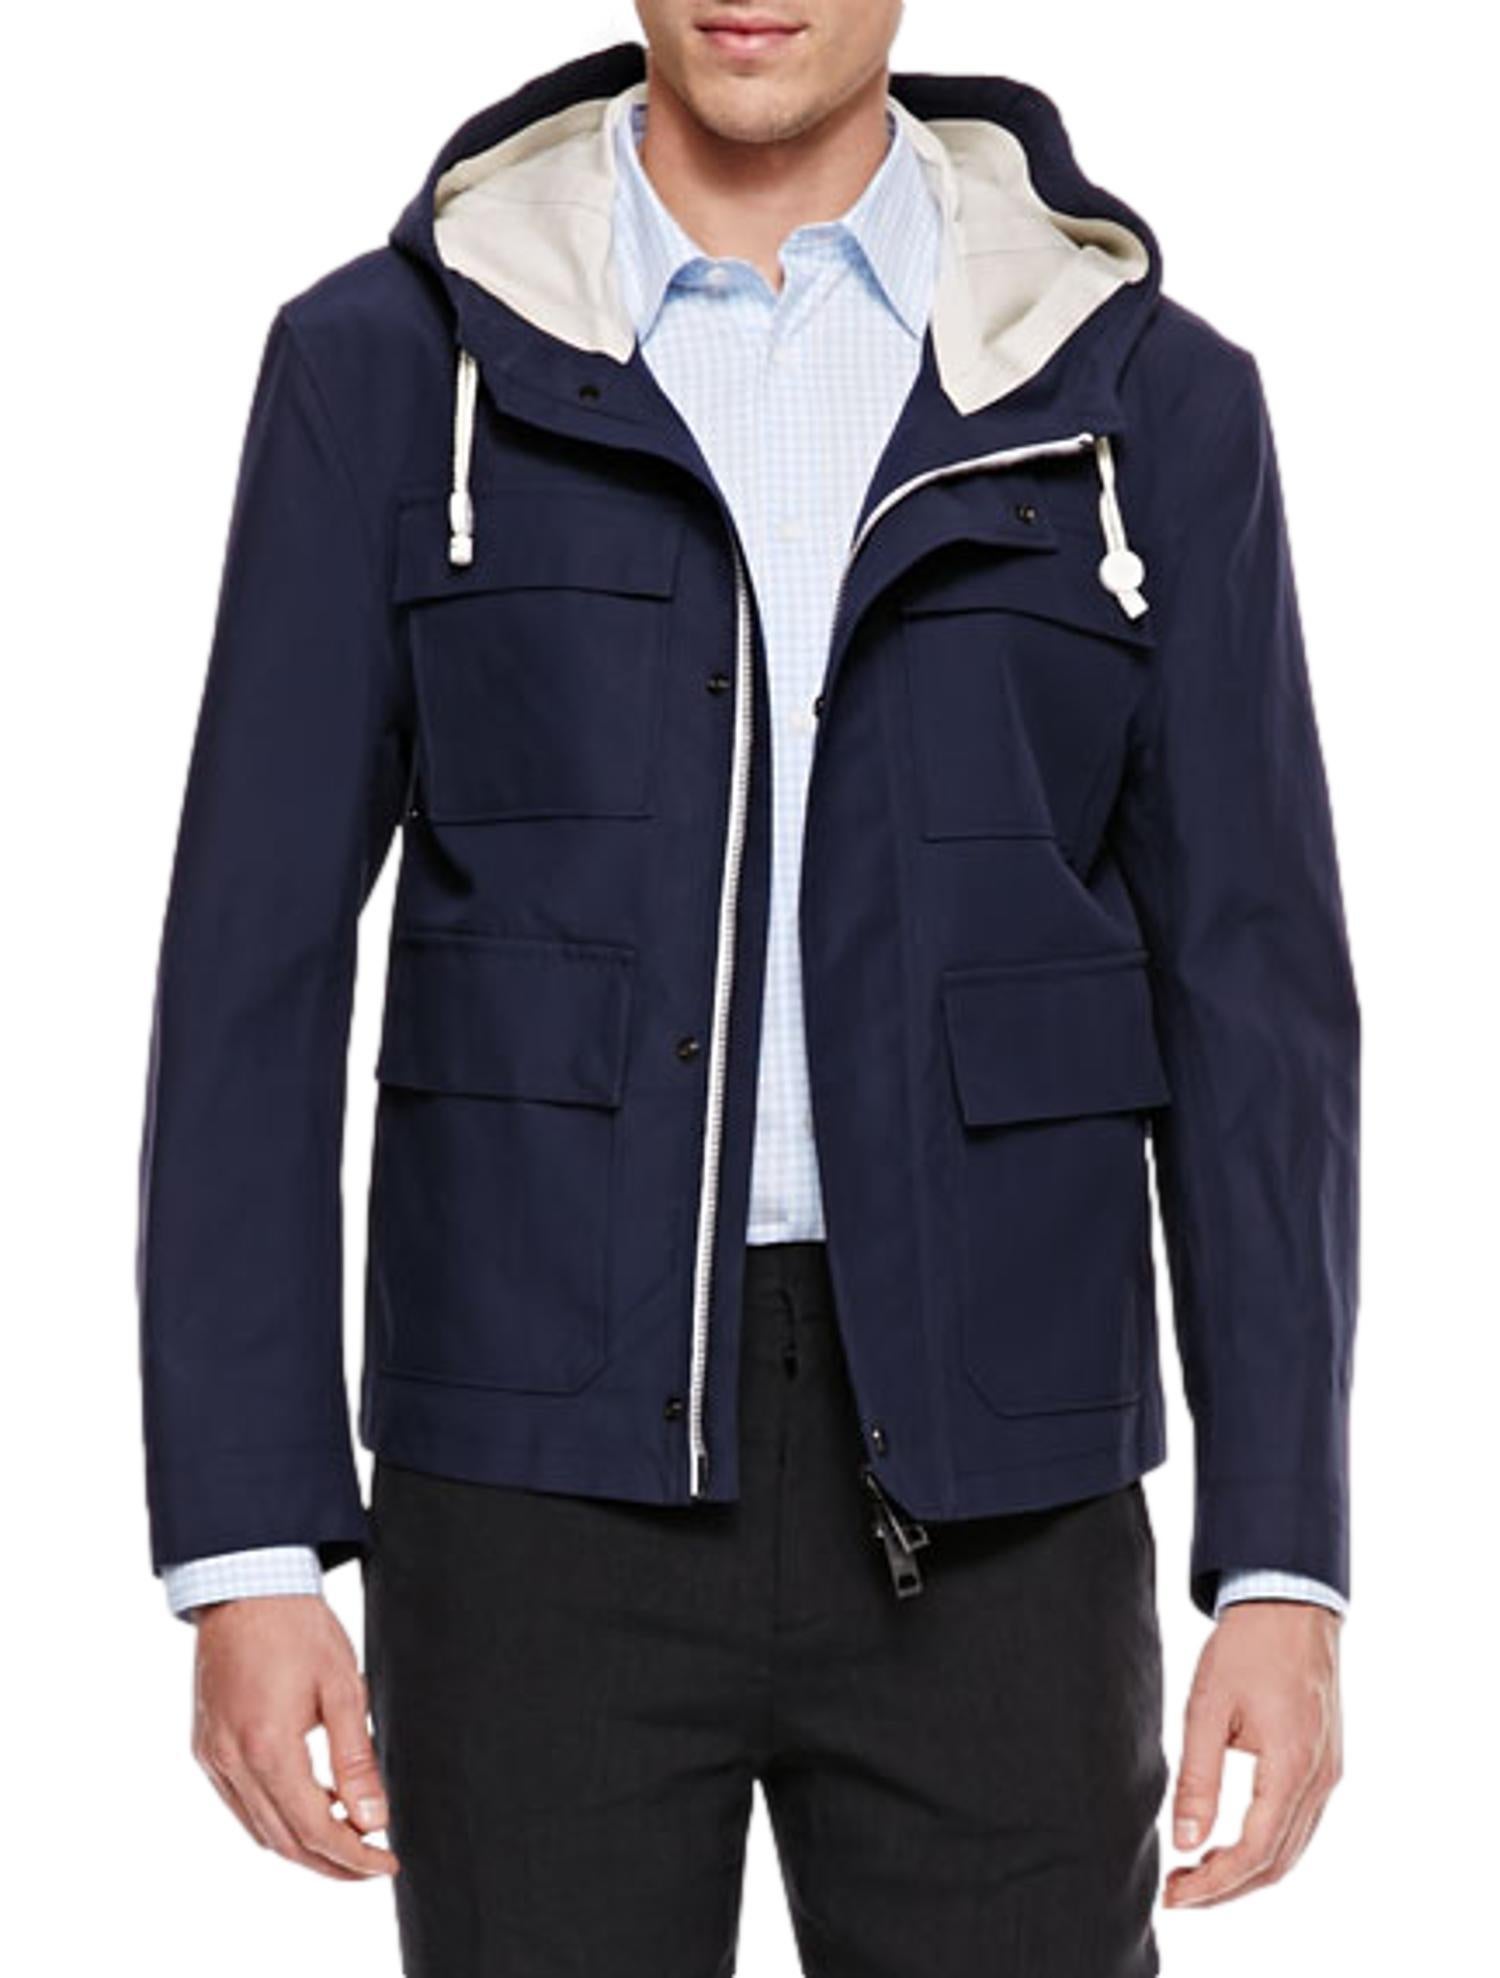 Burberry Prorsum Spring 2014 Navy Blue Sealed-Seam Hooded Cotton Jacket by Christopher Bailey. Cotton jacket is weather proof with seamed seals. Drawstring hood with contrast lining with logo details; snap/zip front. Front four flap pockets. Long